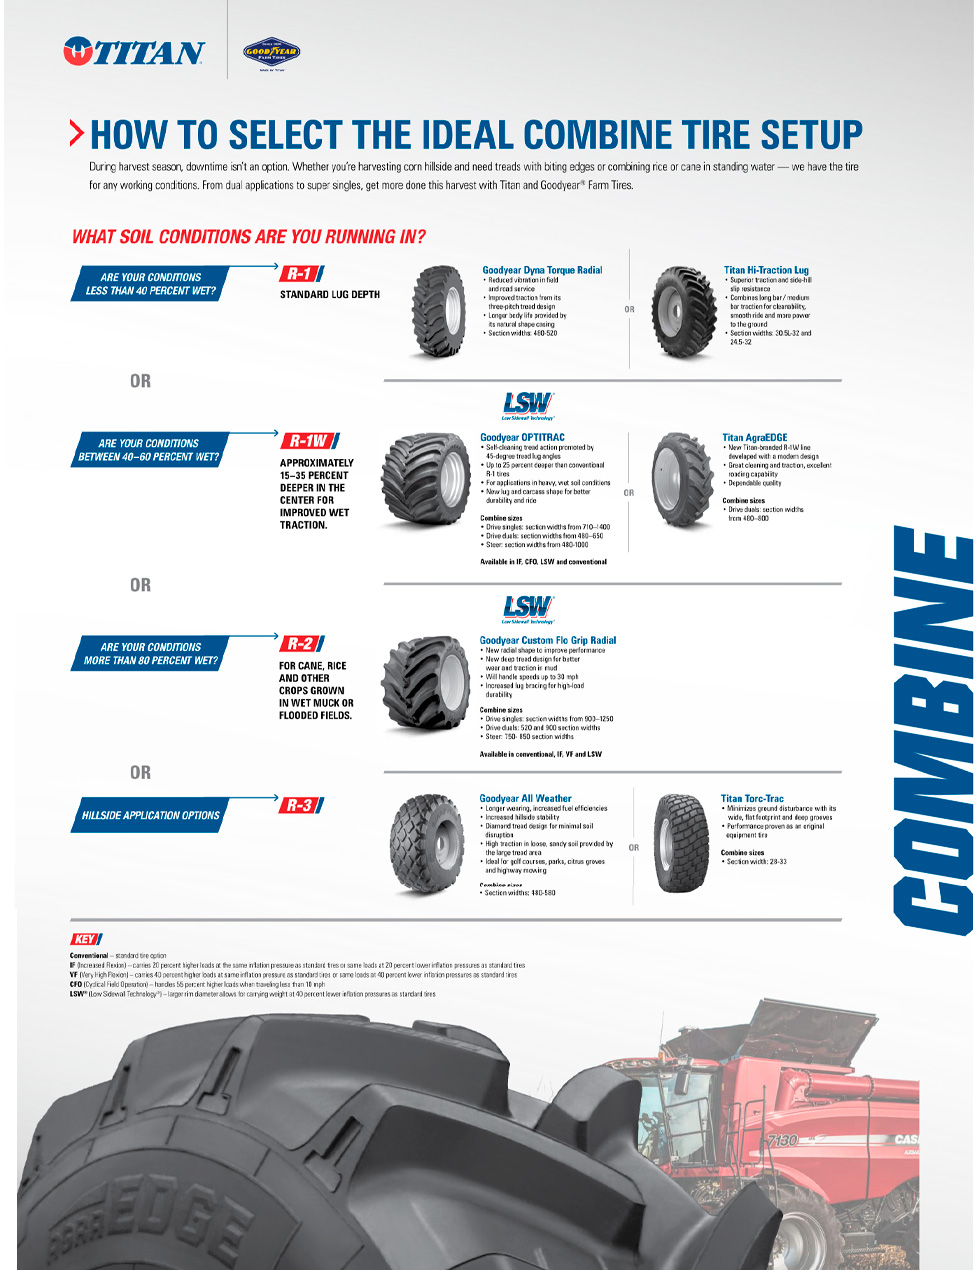 Combine tires selection guide